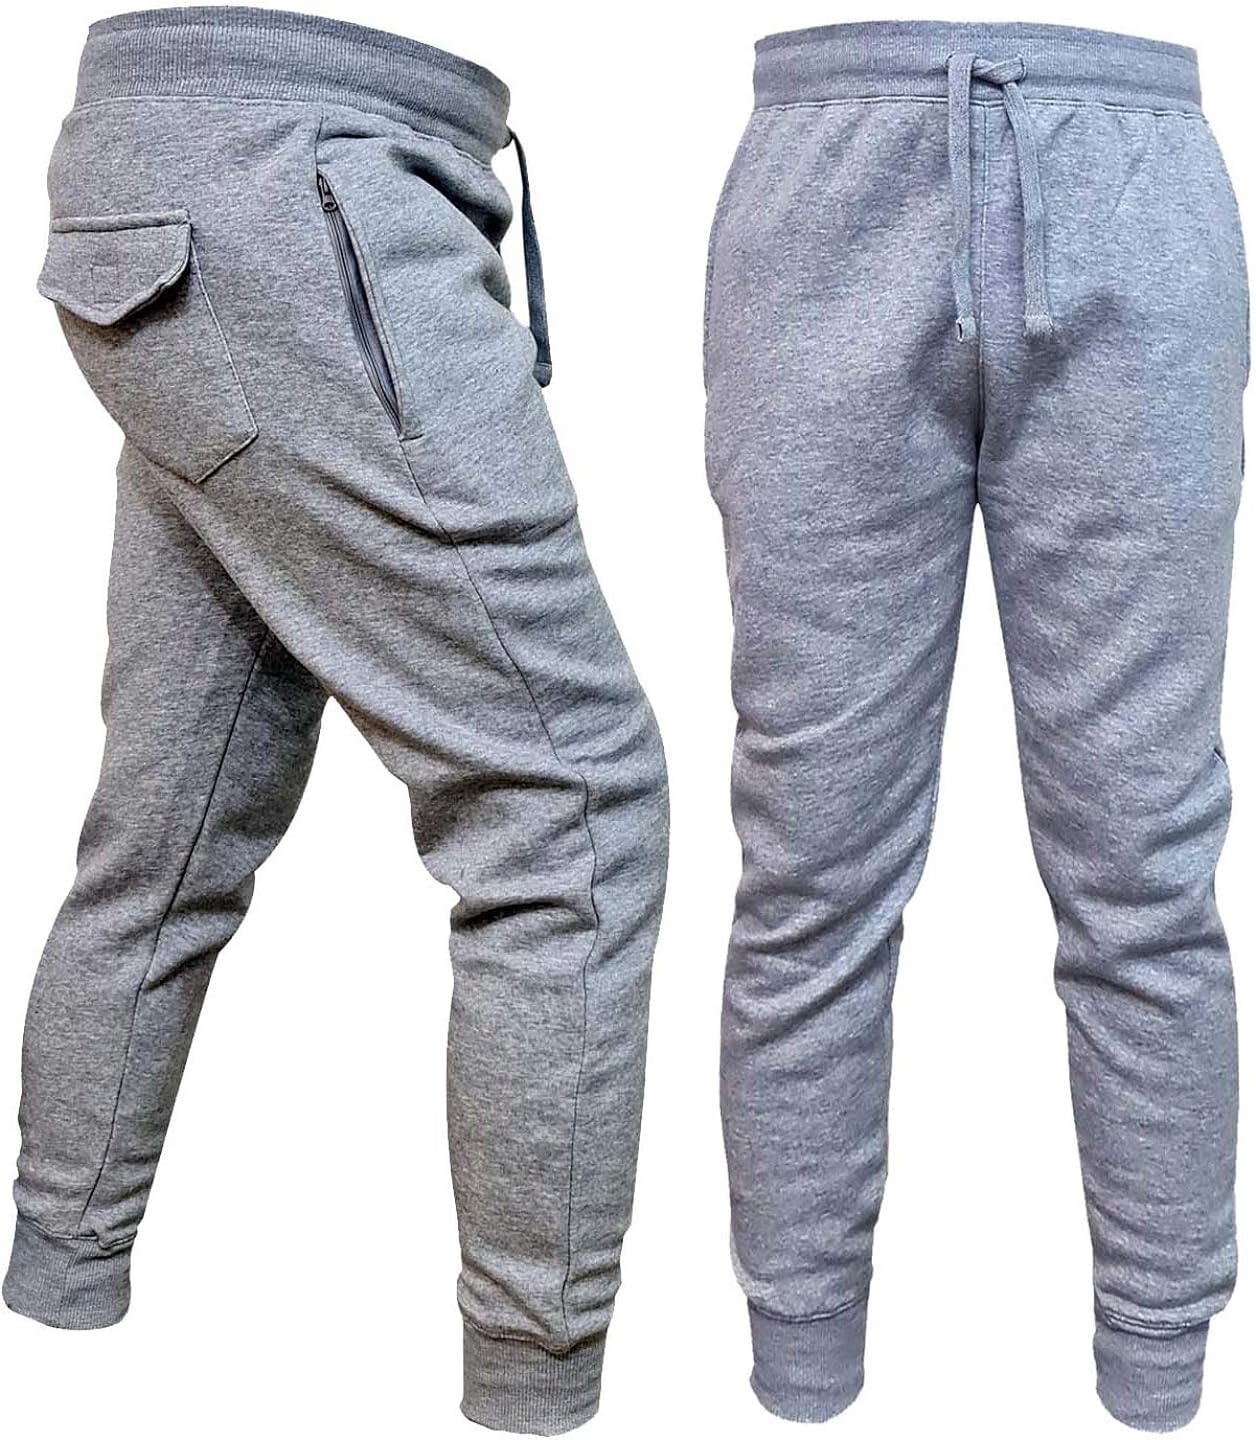 10 Must-Have Men’s Joggers on Sale